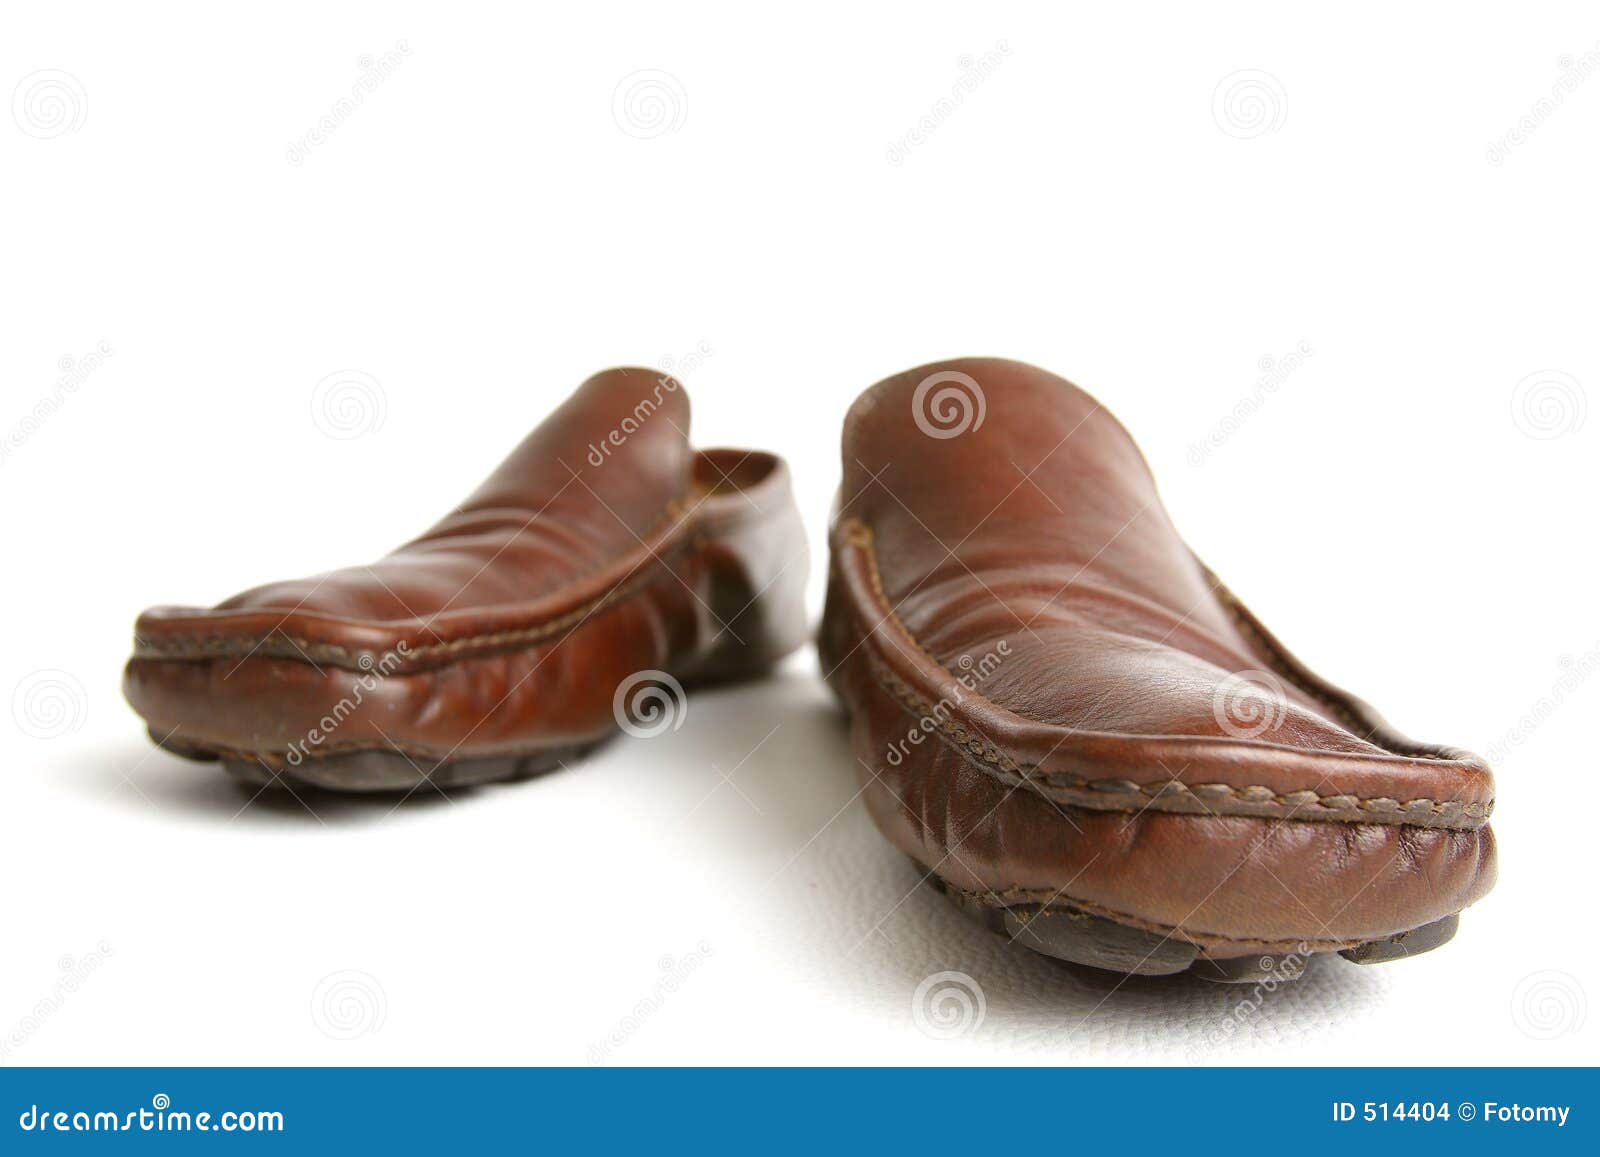 Brown shoes stock photo. Image of leather, healthy, shop - 514404